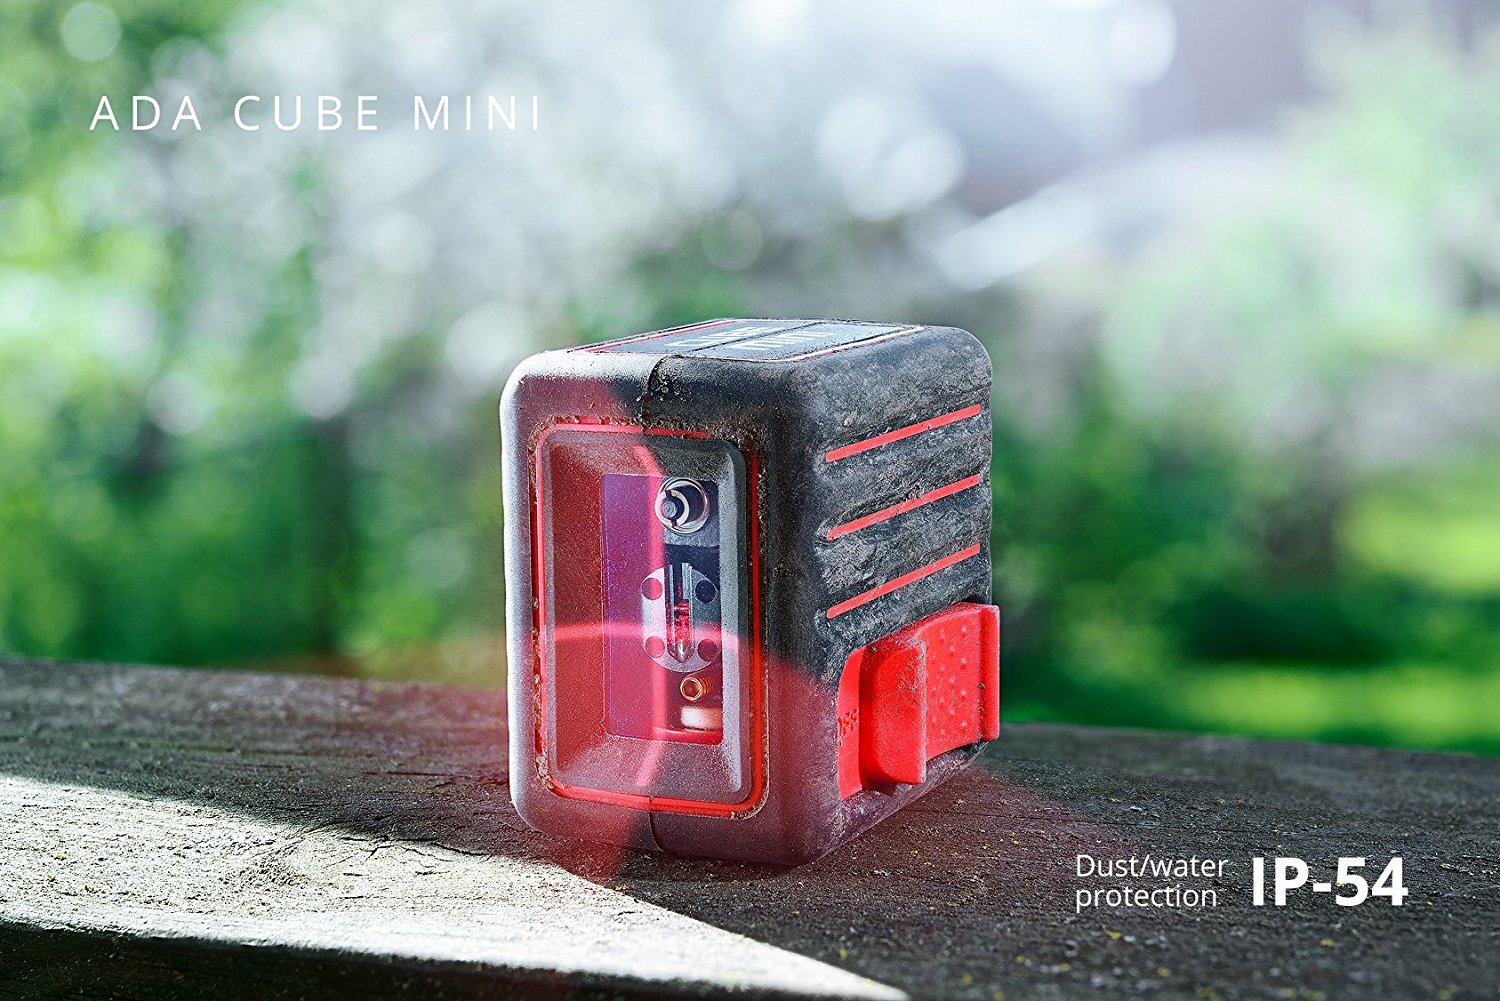 32 feet ADA Cube Mini home edition Laser Level Black/Red, 10 meters 